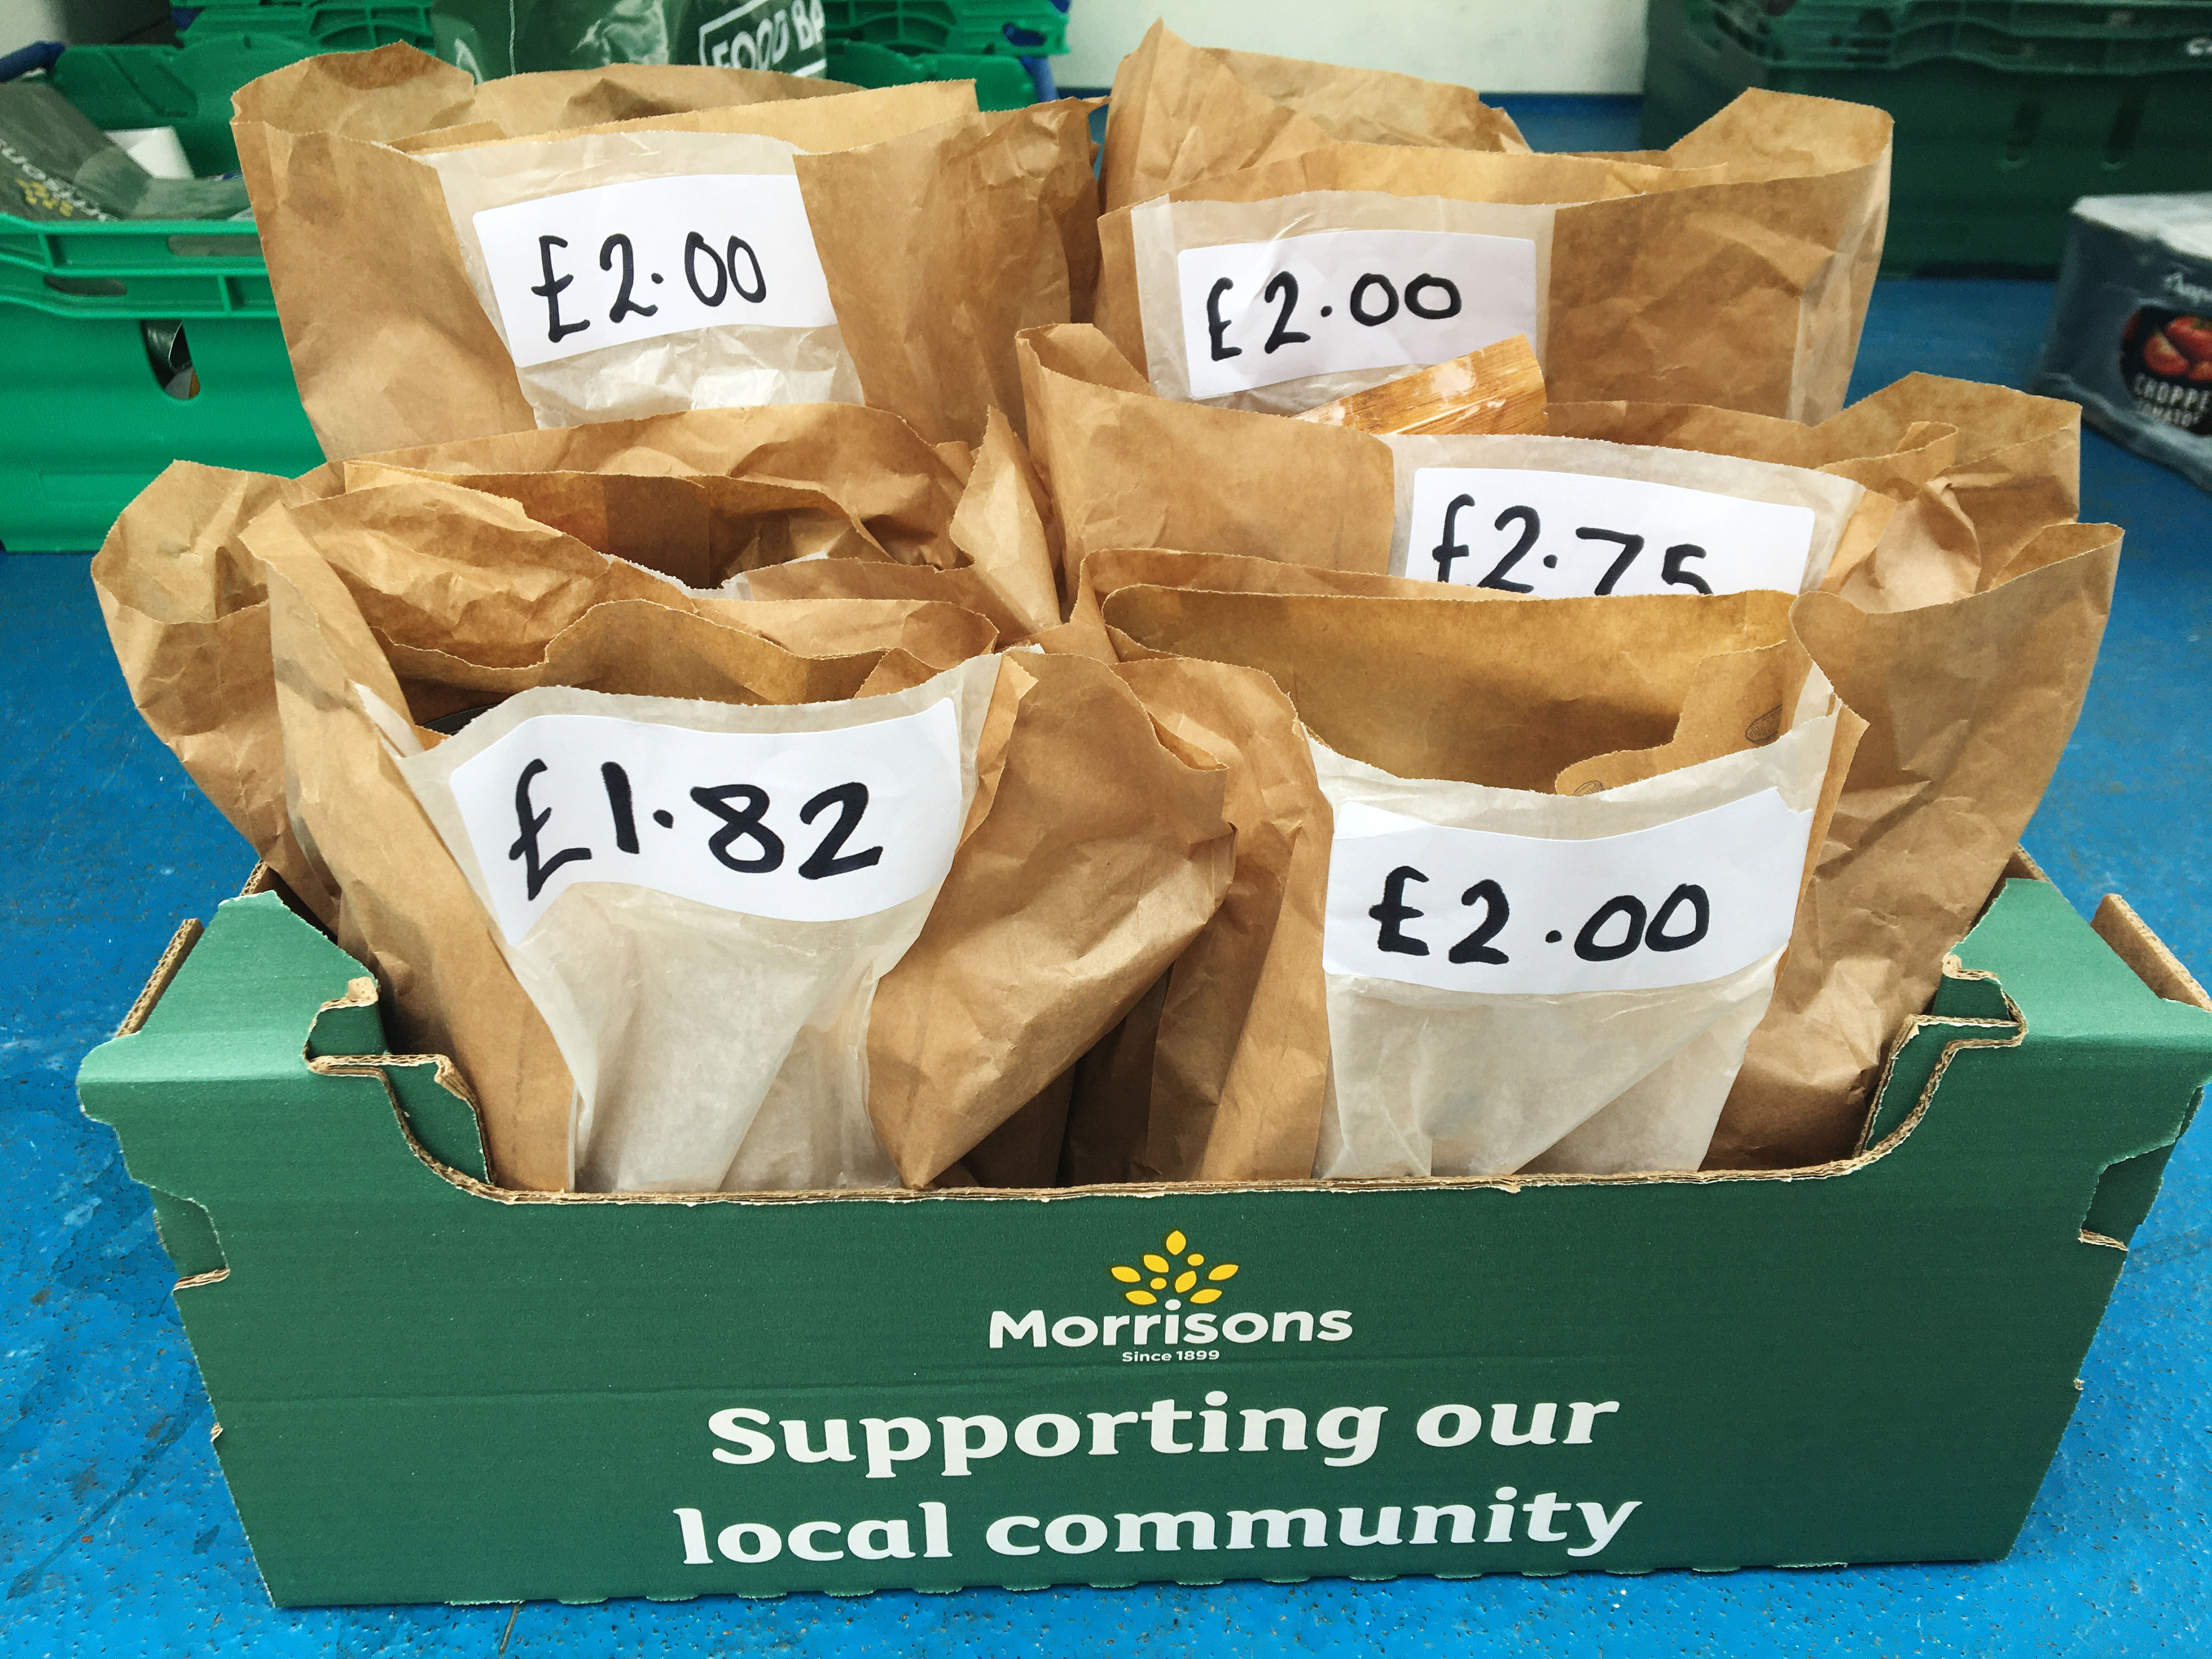 Morrisons introduces food parcels for customers to purchase for those in need